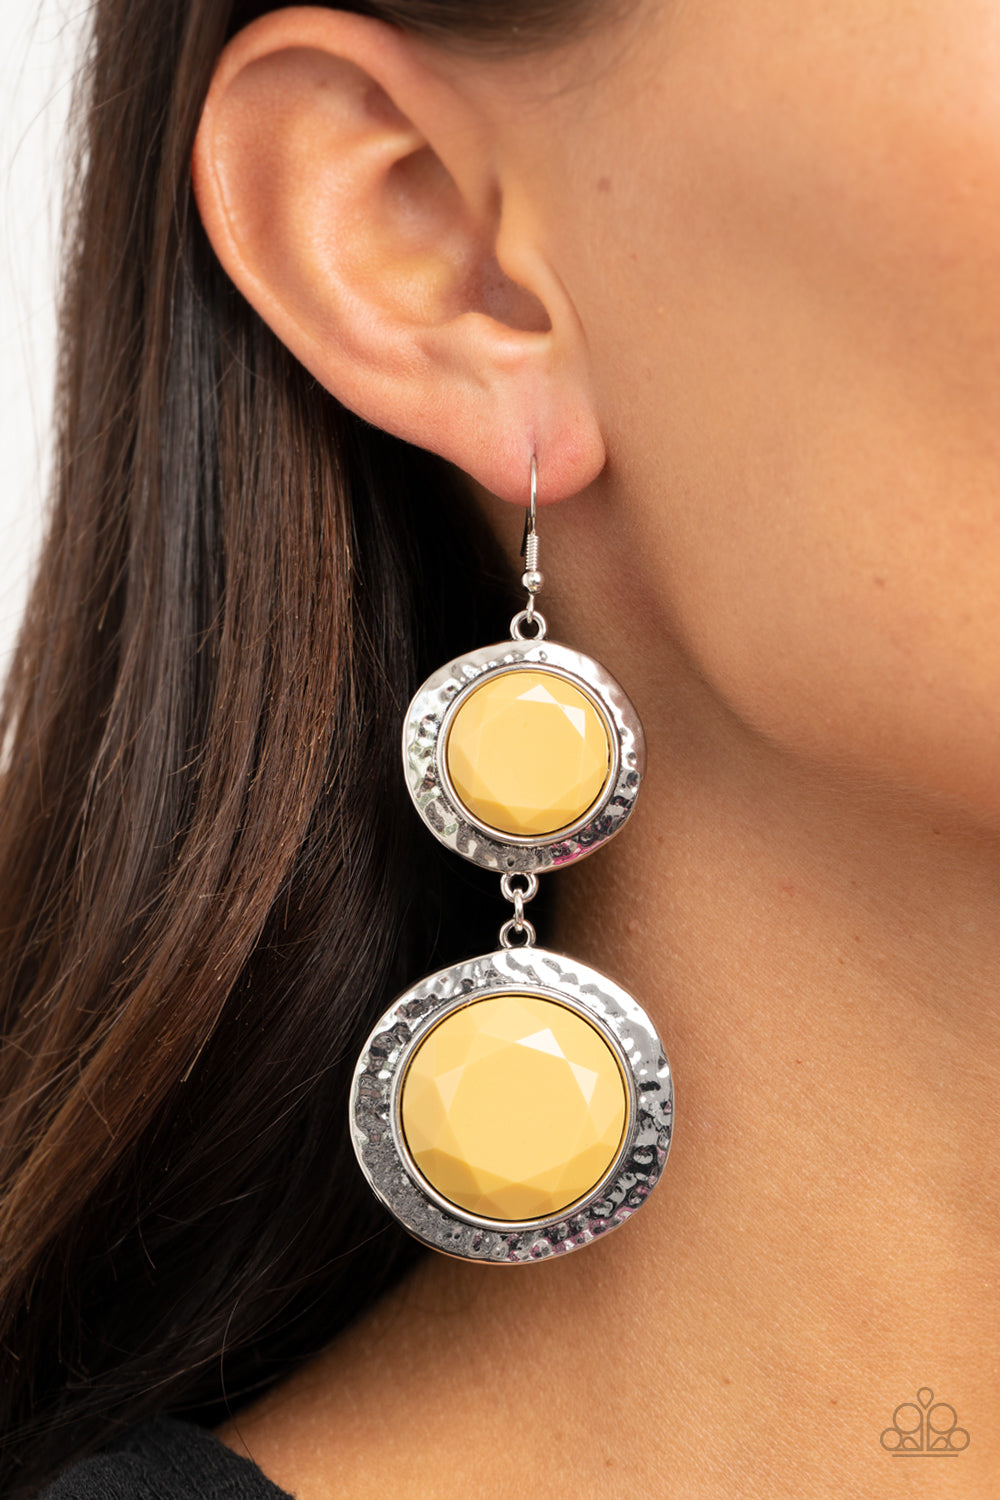 Paparazzi Accessores - Thrift Shop Stop - Yellow Earrings